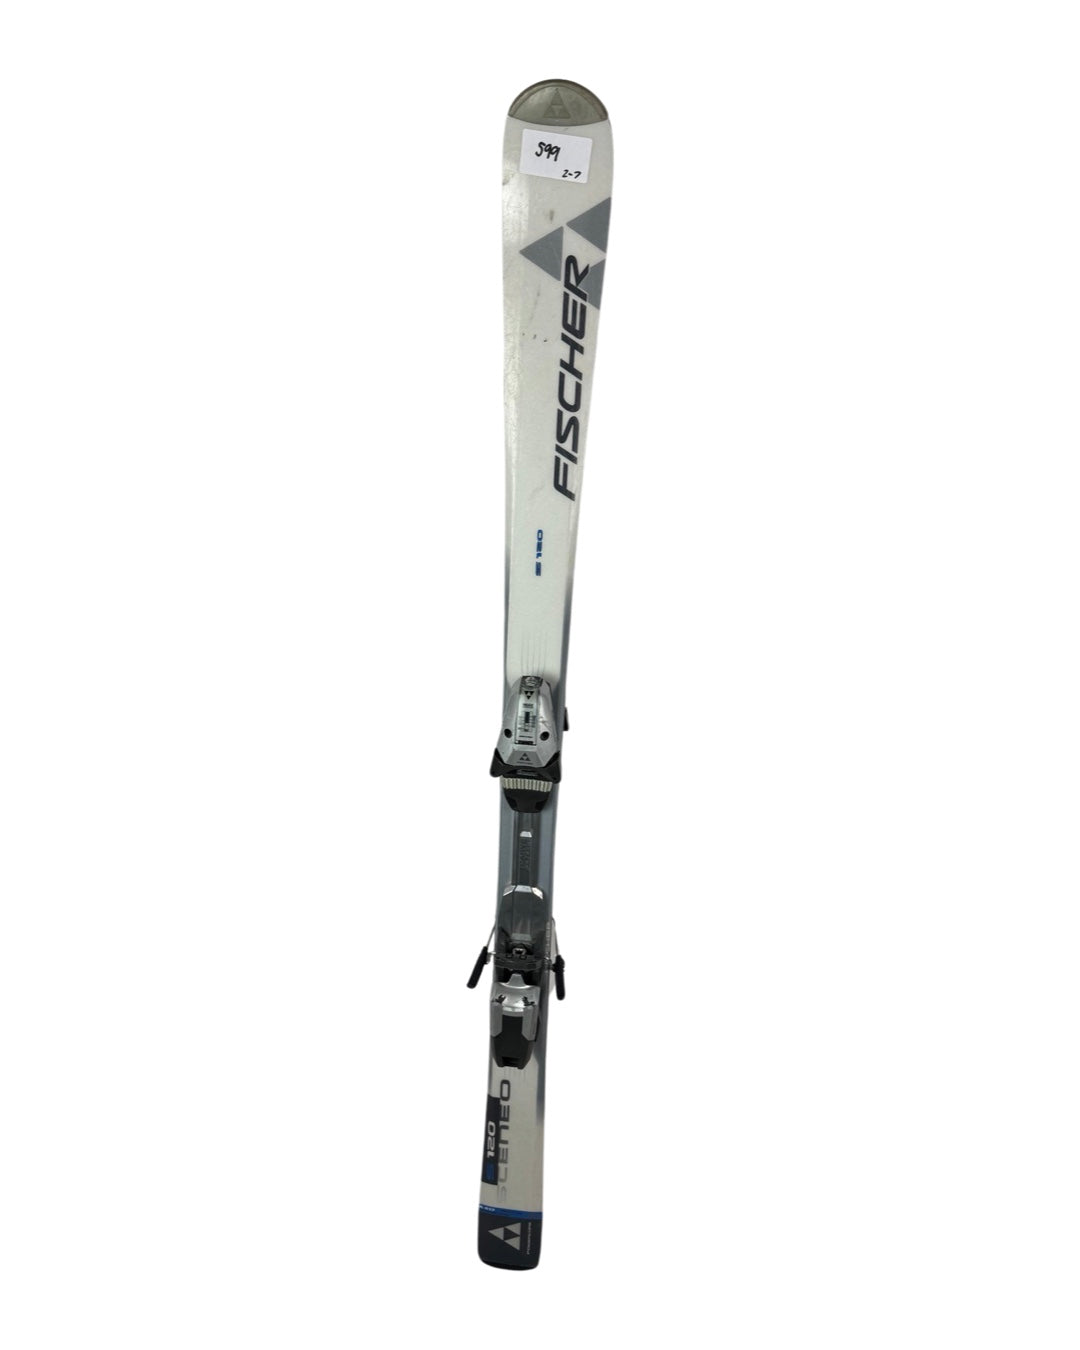 Adult skis - mixed 599 2